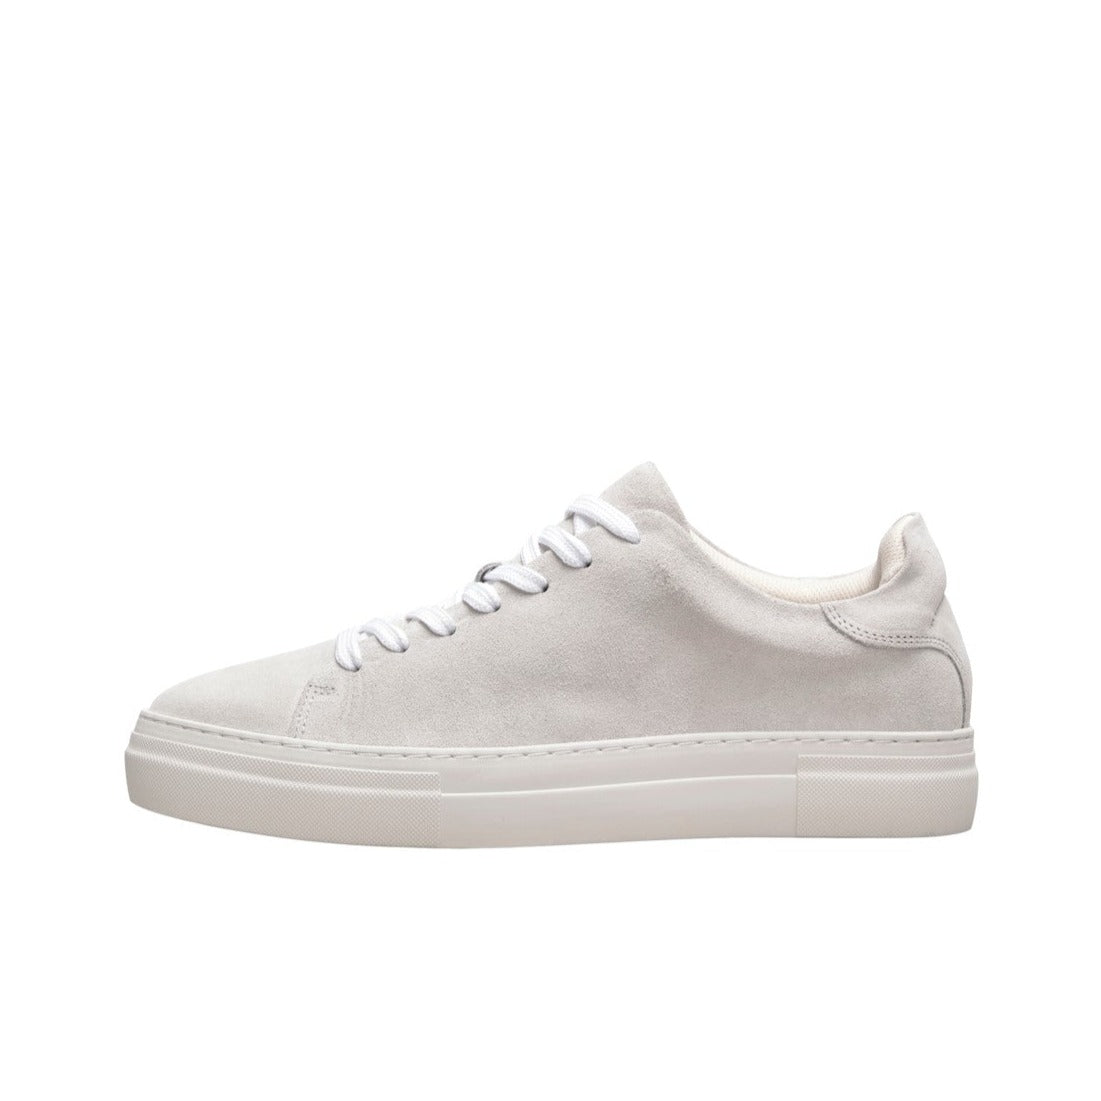 David Chunky Suede Trainer - White